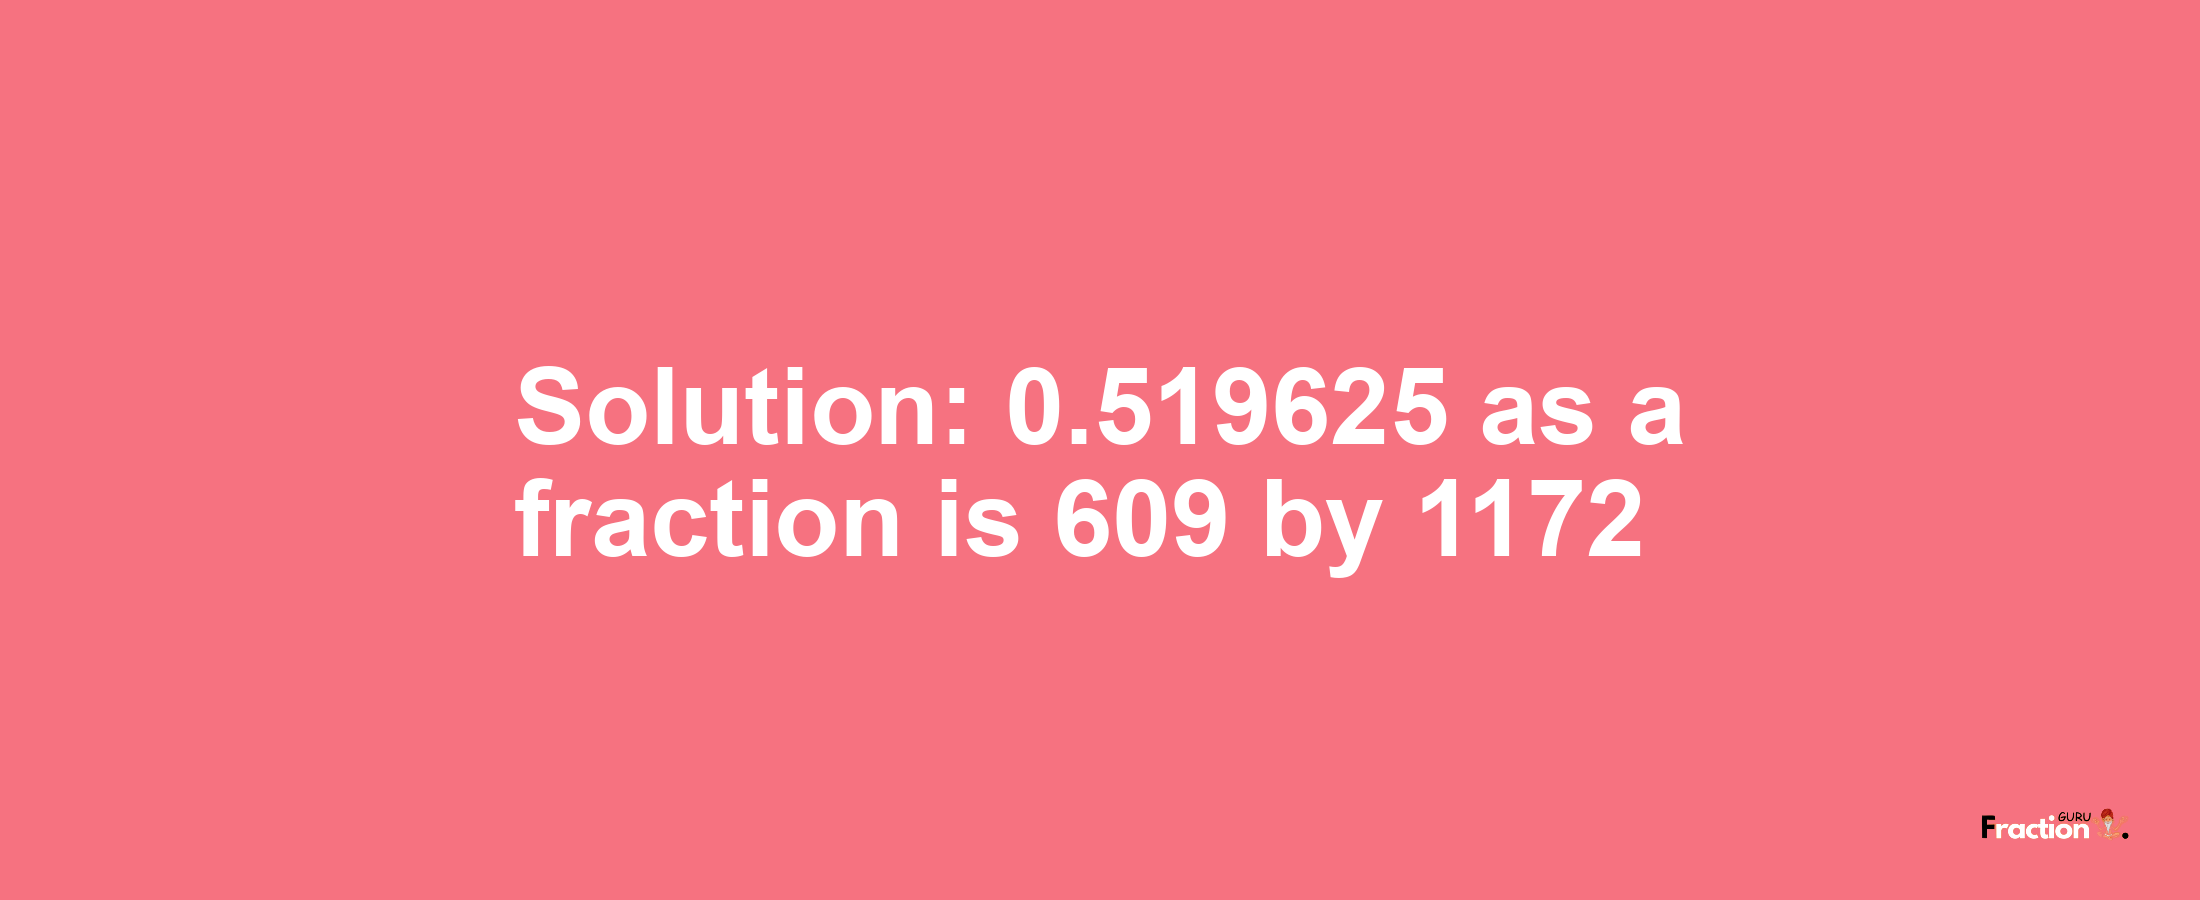 Solution:0.519625 as a fraction is 609/1172